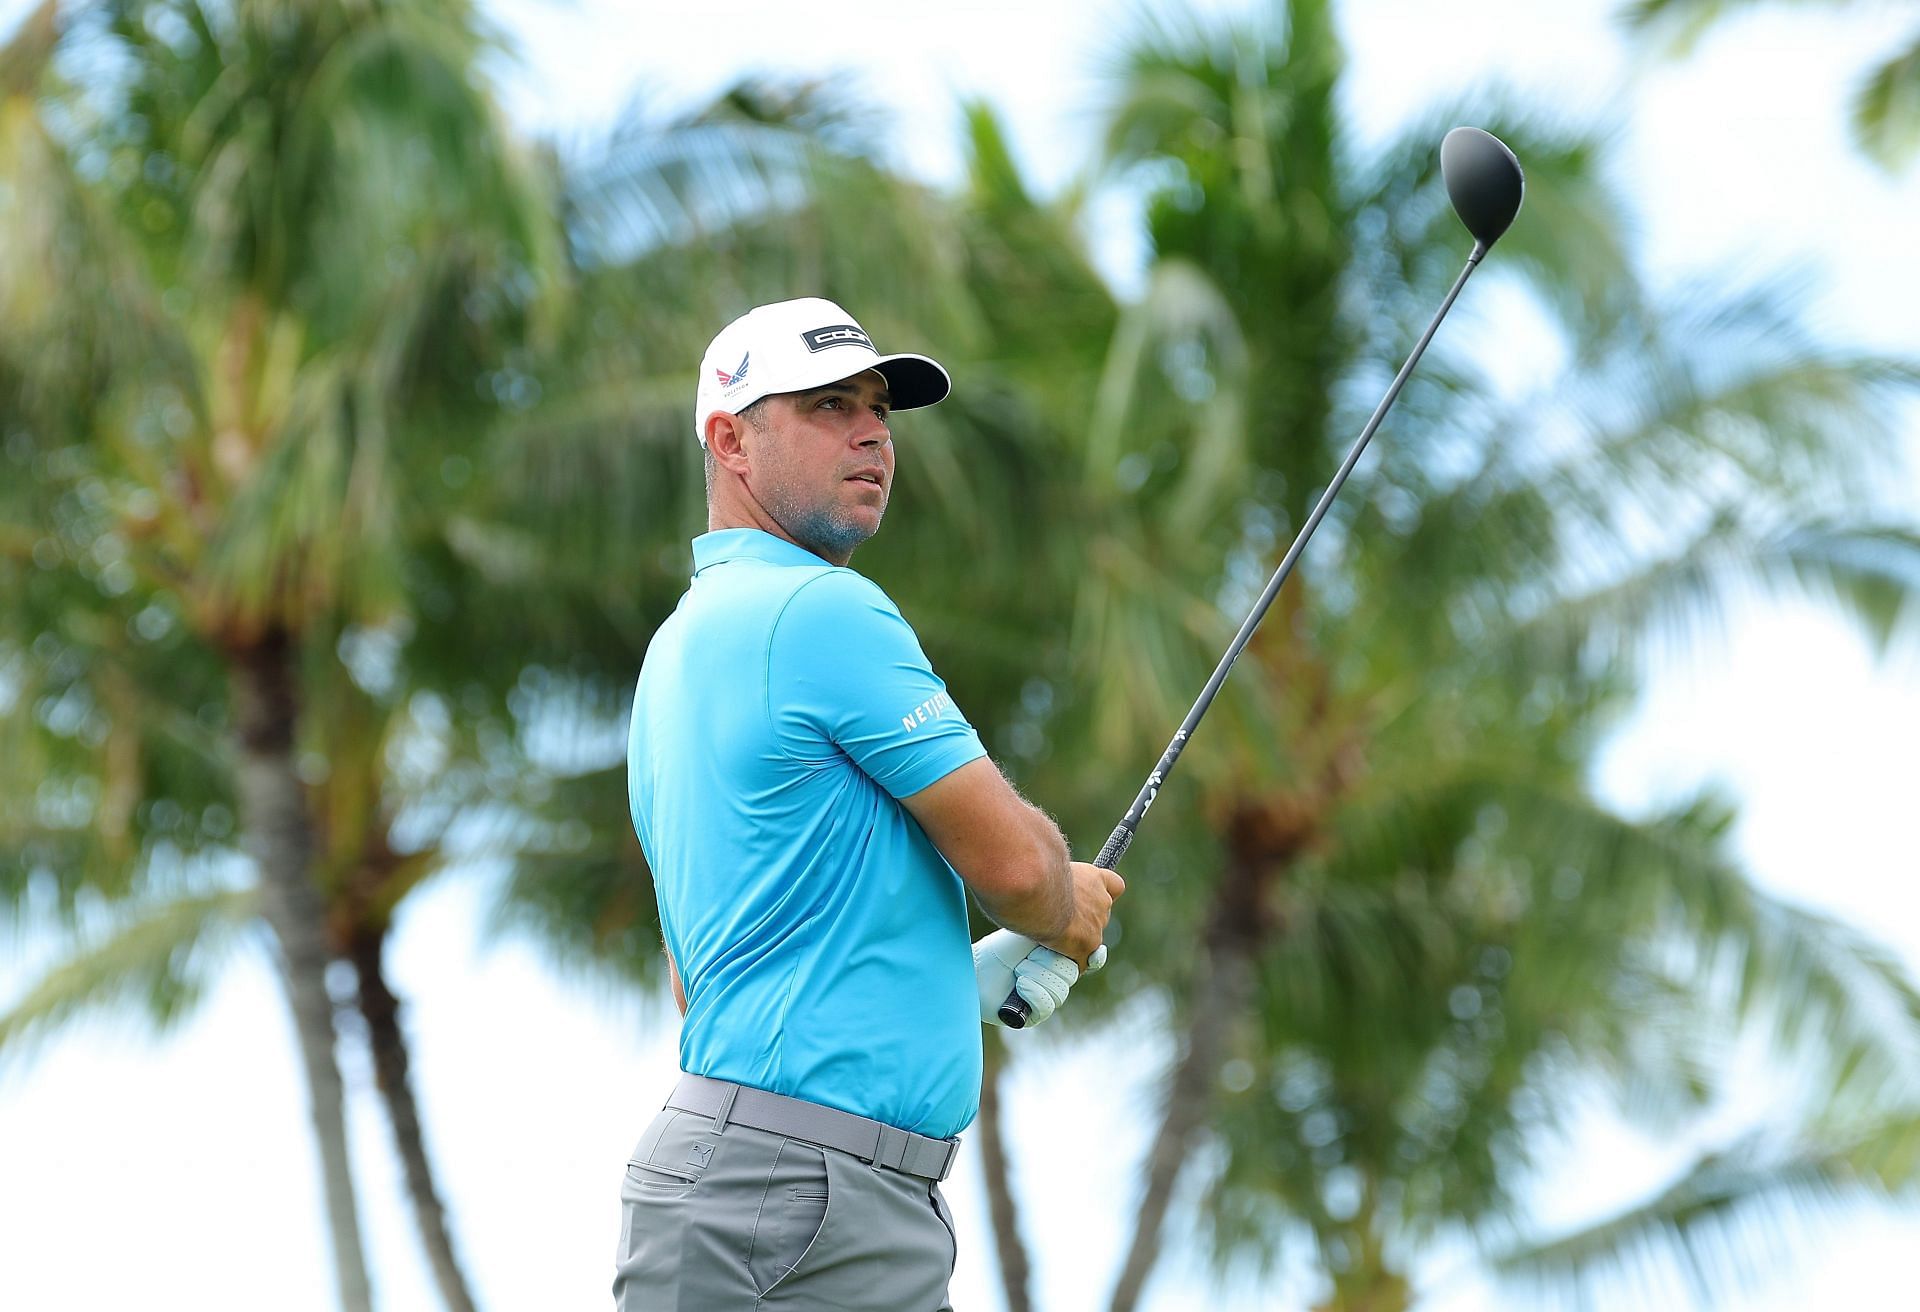 Sony Open in Hawaii - Preview Day Two